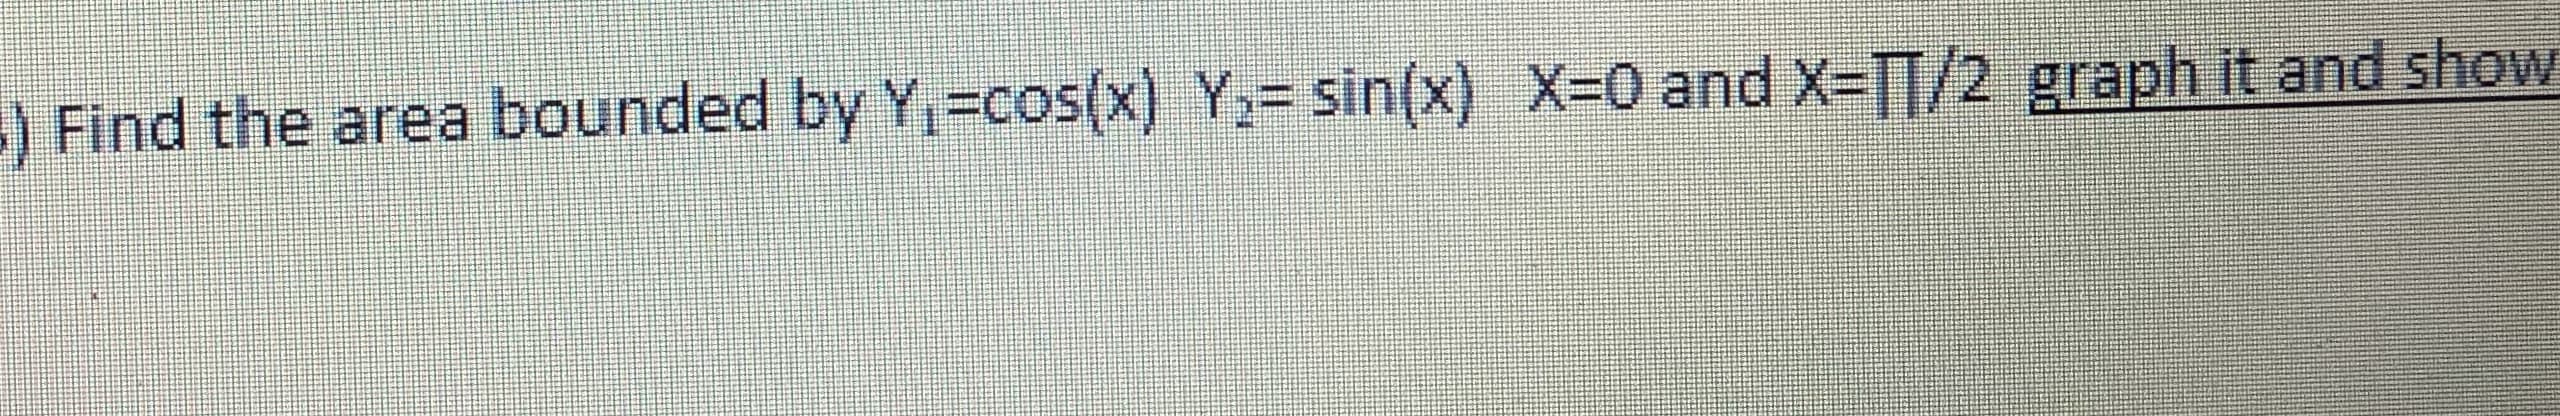 ) Find the area bounded by Y,=cos(x) Y,= sin(x) X-0 and X-IT/2 graph it and show
